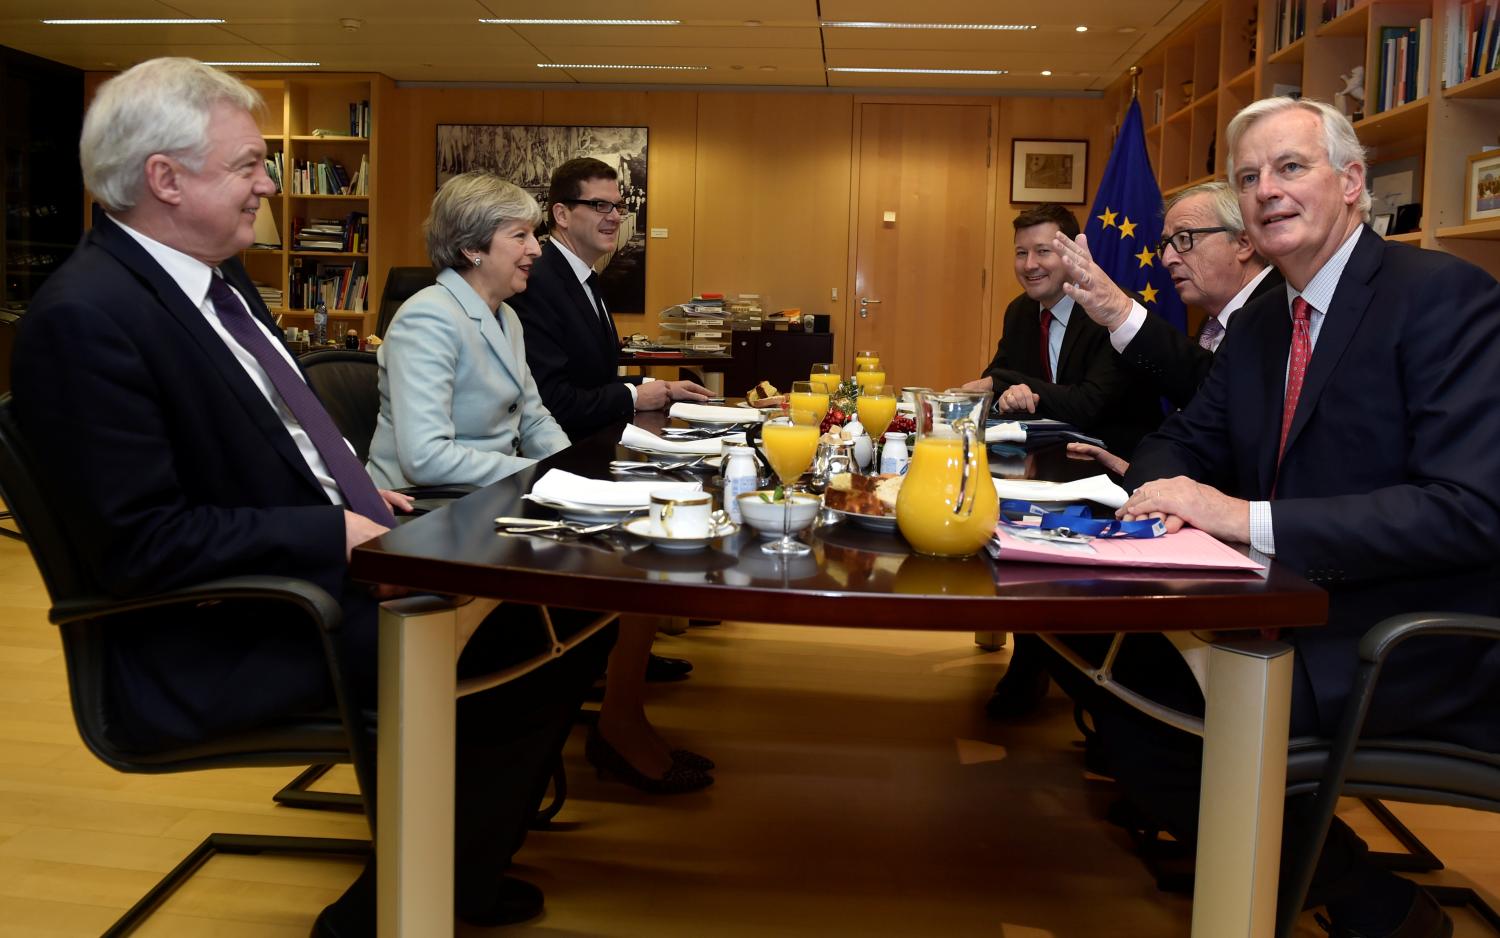 (L to R) Britain's Secretary of State for Exiting the European Union David Davis, Britain's Prime Minister Theresa May, European Commission President Jean-Claude Juncker and European Union's chief Brexit negotiator Michel Barnier meet at the European Commission in Brussels, Belgium, December 8, 2017. REUTERS/Eric Vidal - RC1FA1277AE0